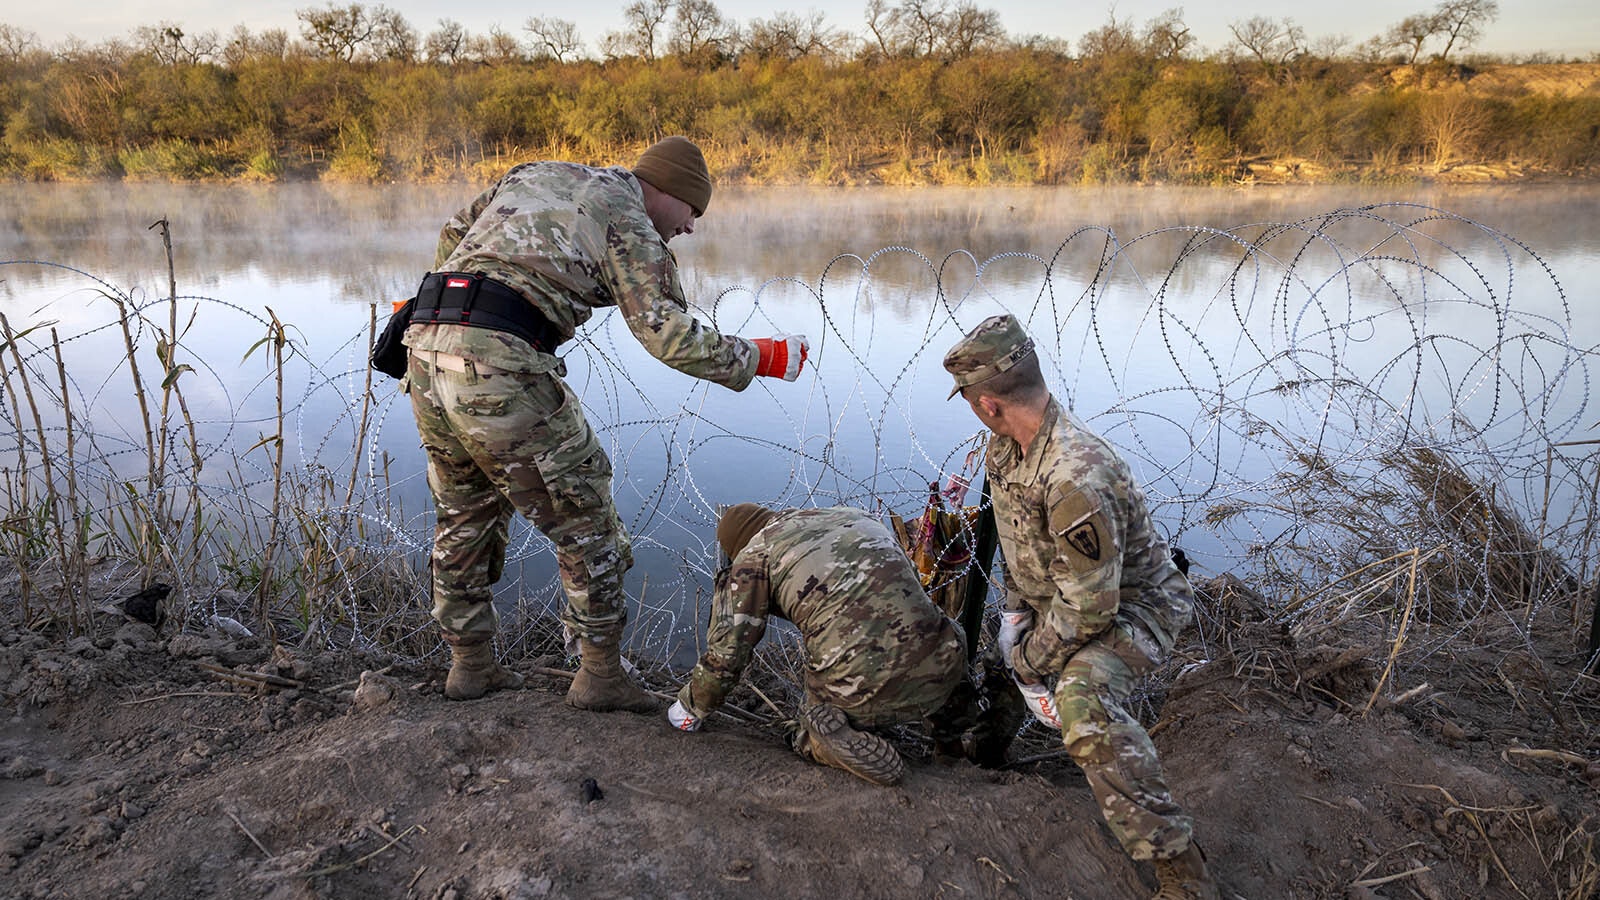 Texas National Guard members repair razor wire at the U.S. border after a surge of immigrants damaged it.